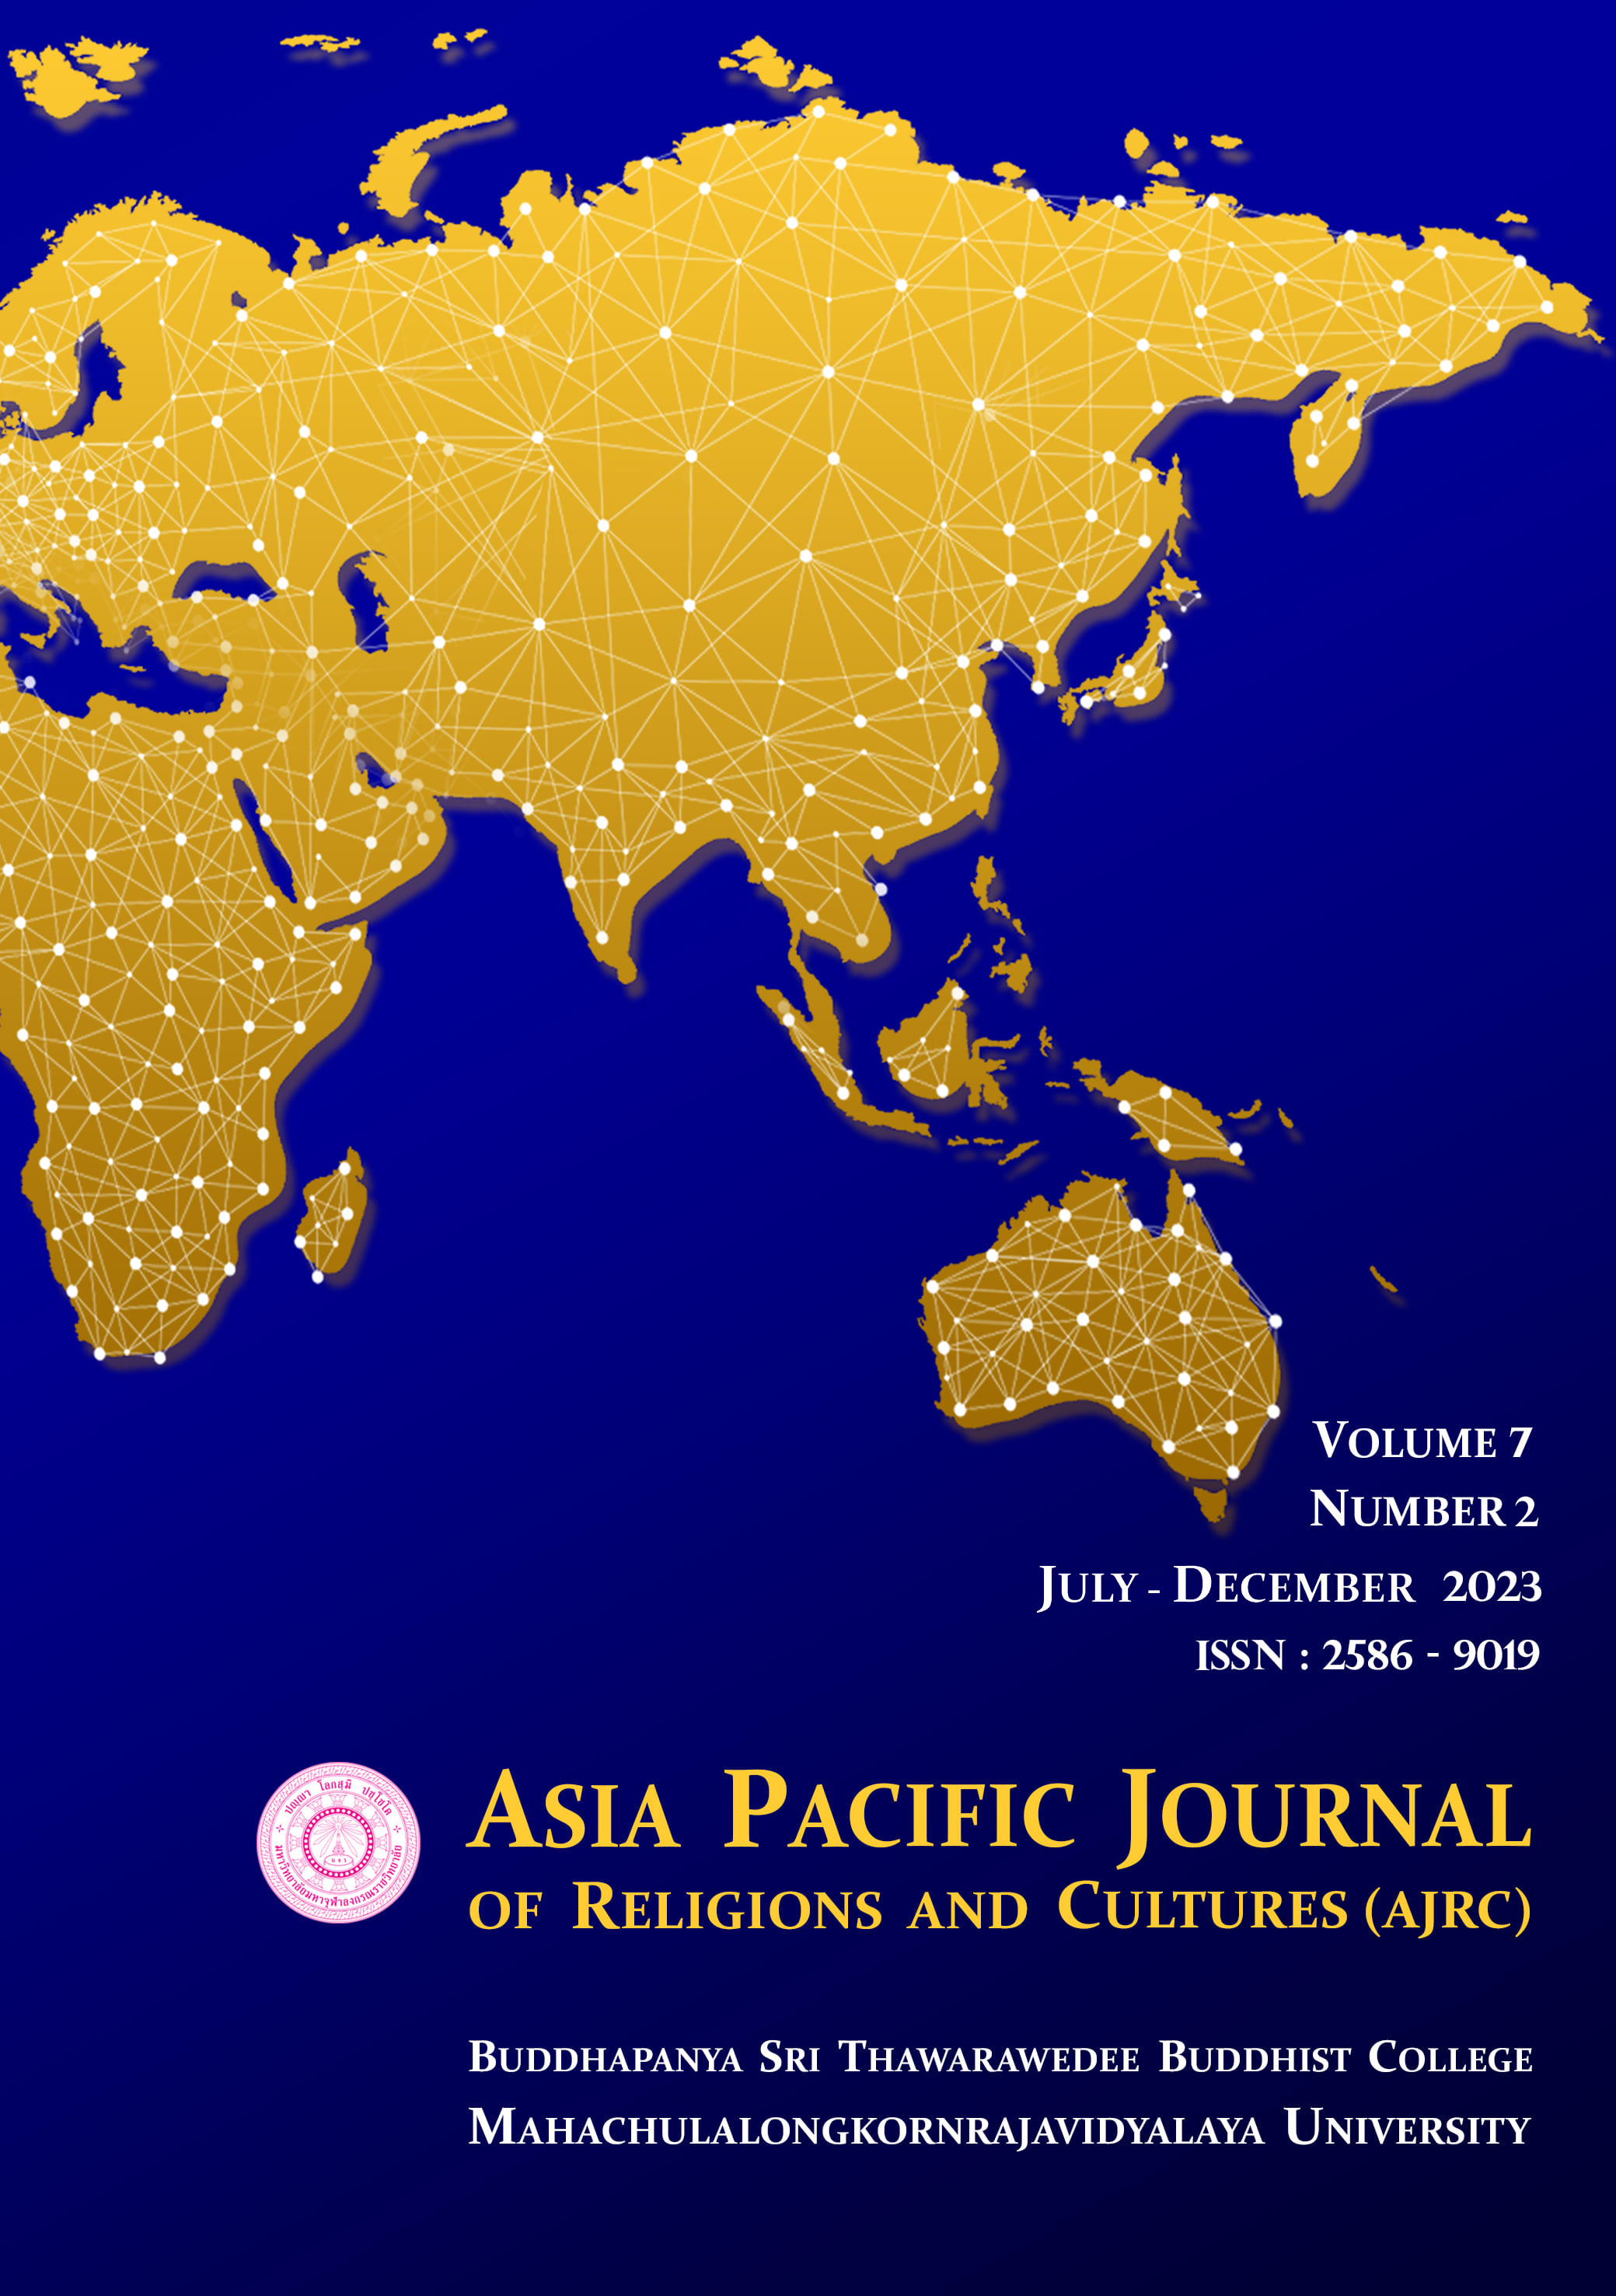 Asia Pacific Journal of Religions and Cultures